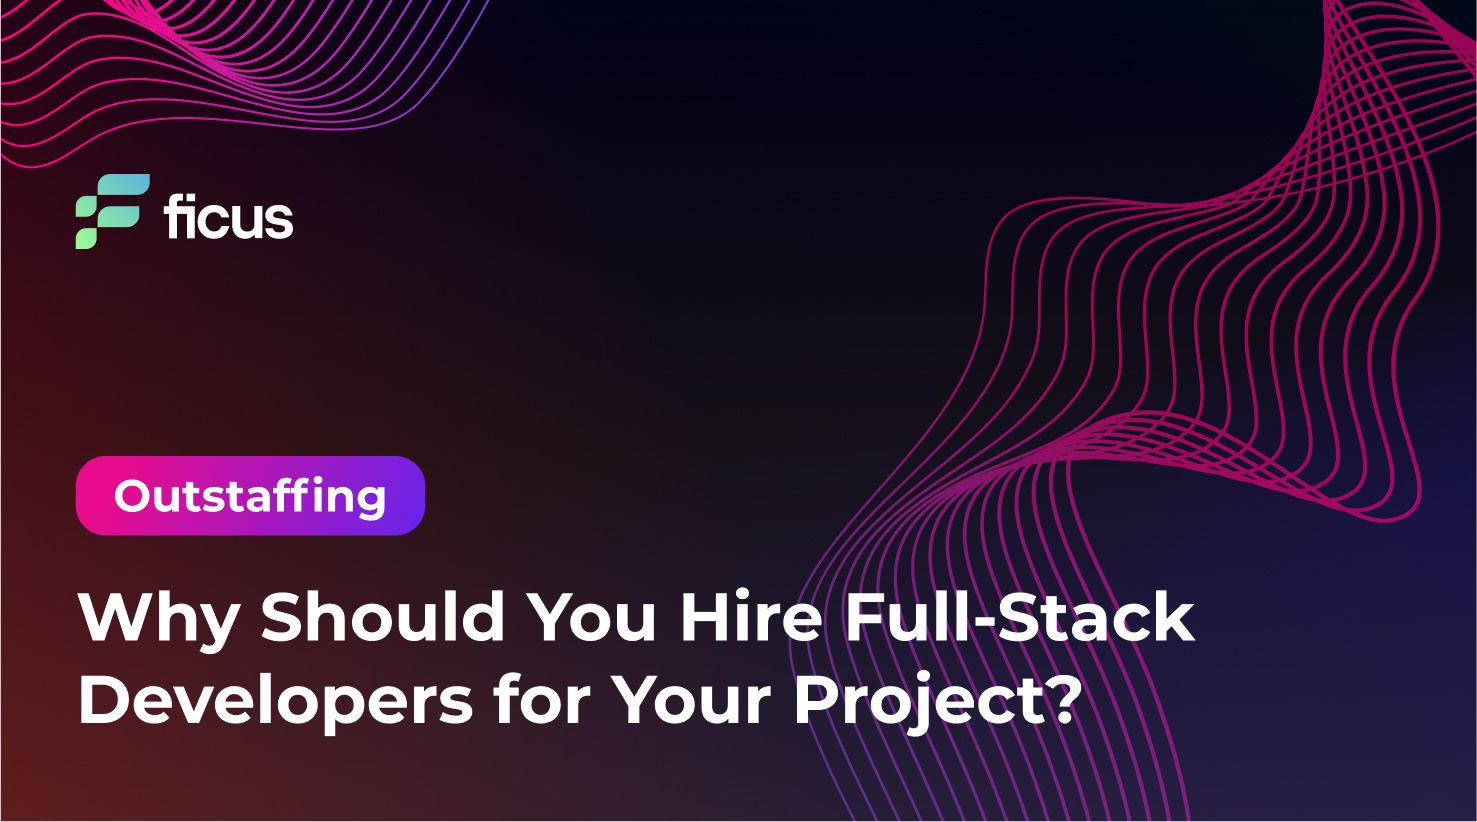 Why Should You Hire Full-Stack Developers for Your Project